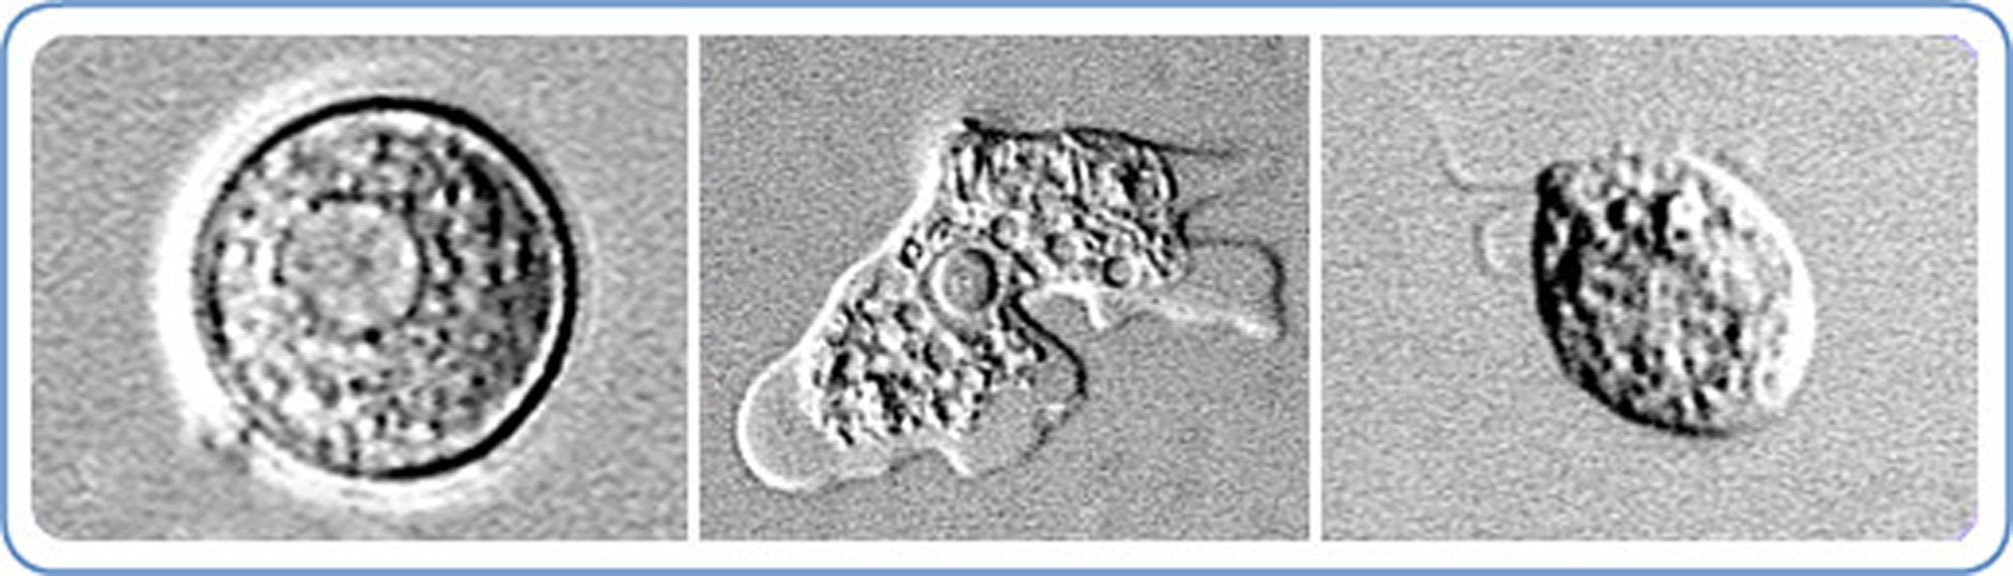 An 18-year-old Ohio woman died of primary amebic mengioencephalitis on Sunday, a rare but fatal brain infection caused by the amoeba Naegleria fowleri, said Mitzi Kline, director of communication for Franklin County Public Health. The Centers for Disease Control and Prevention confirmed the presence of the brain-eating amoeba in cerebral spinal fluid.